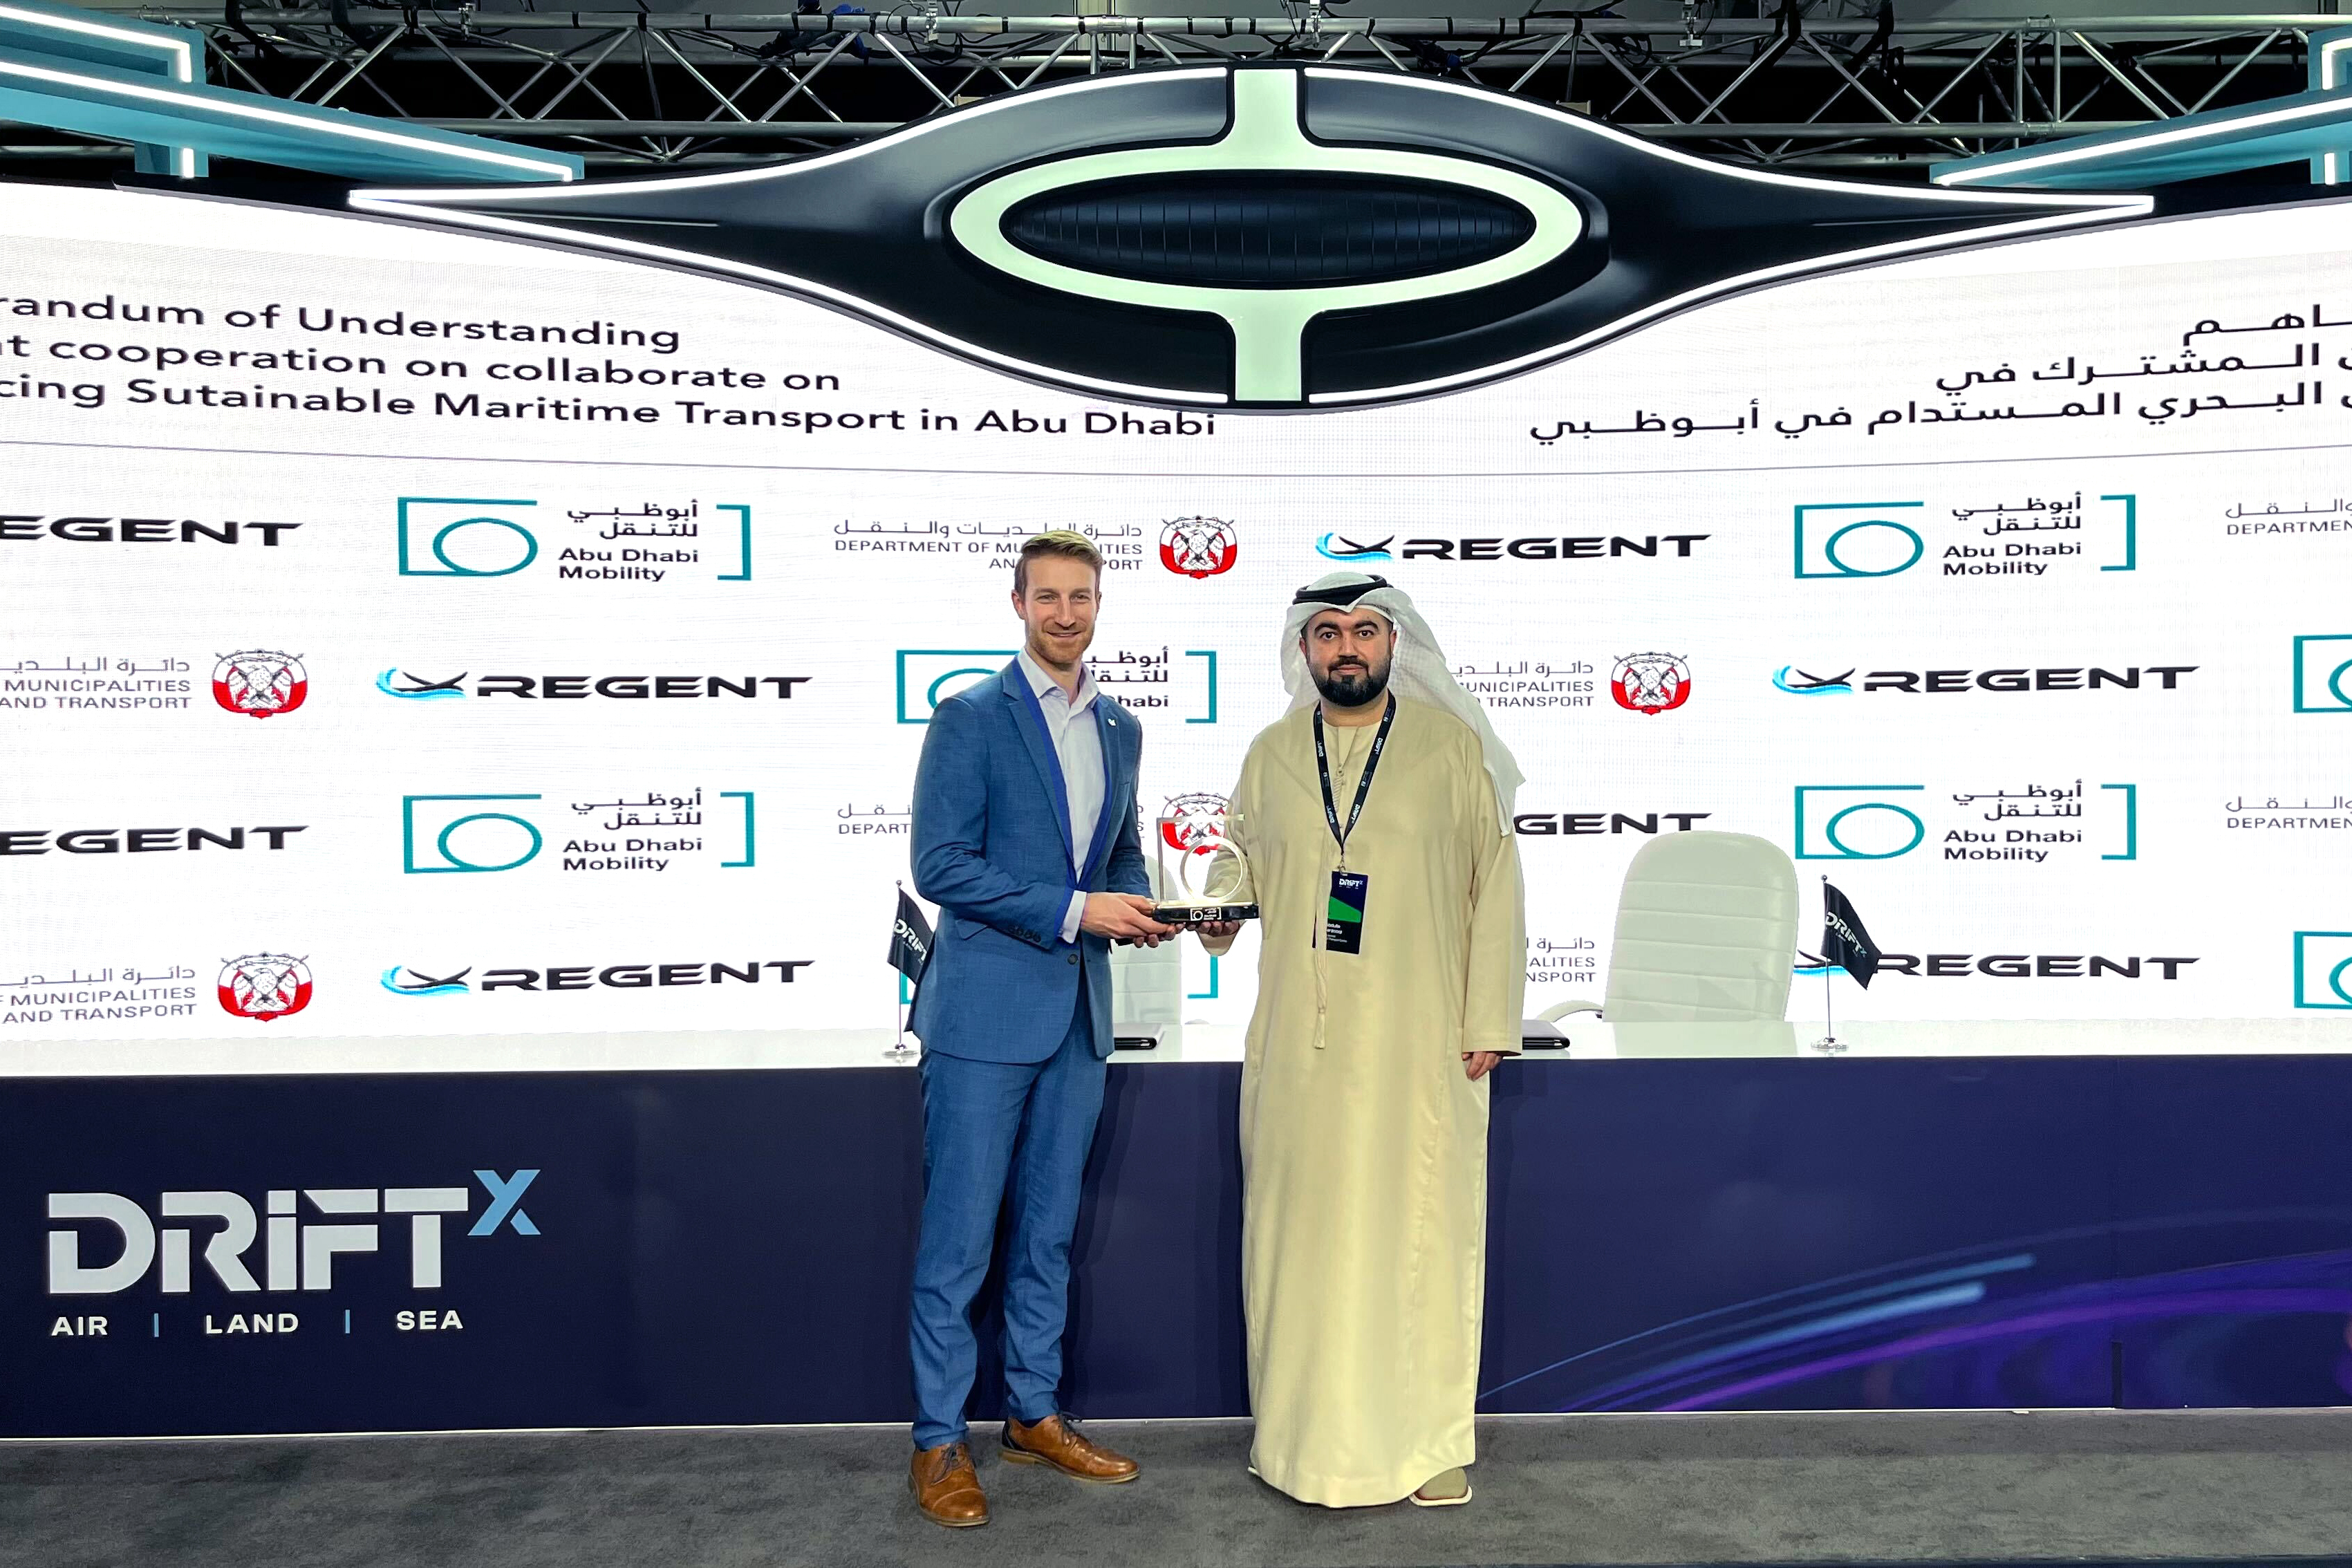 REGENT Co-Founder and CEO Billy Thalheimer (left) signs an MOU with the Abu Dhabi Department of Transportation today at DriftX in Abu Dhabi.